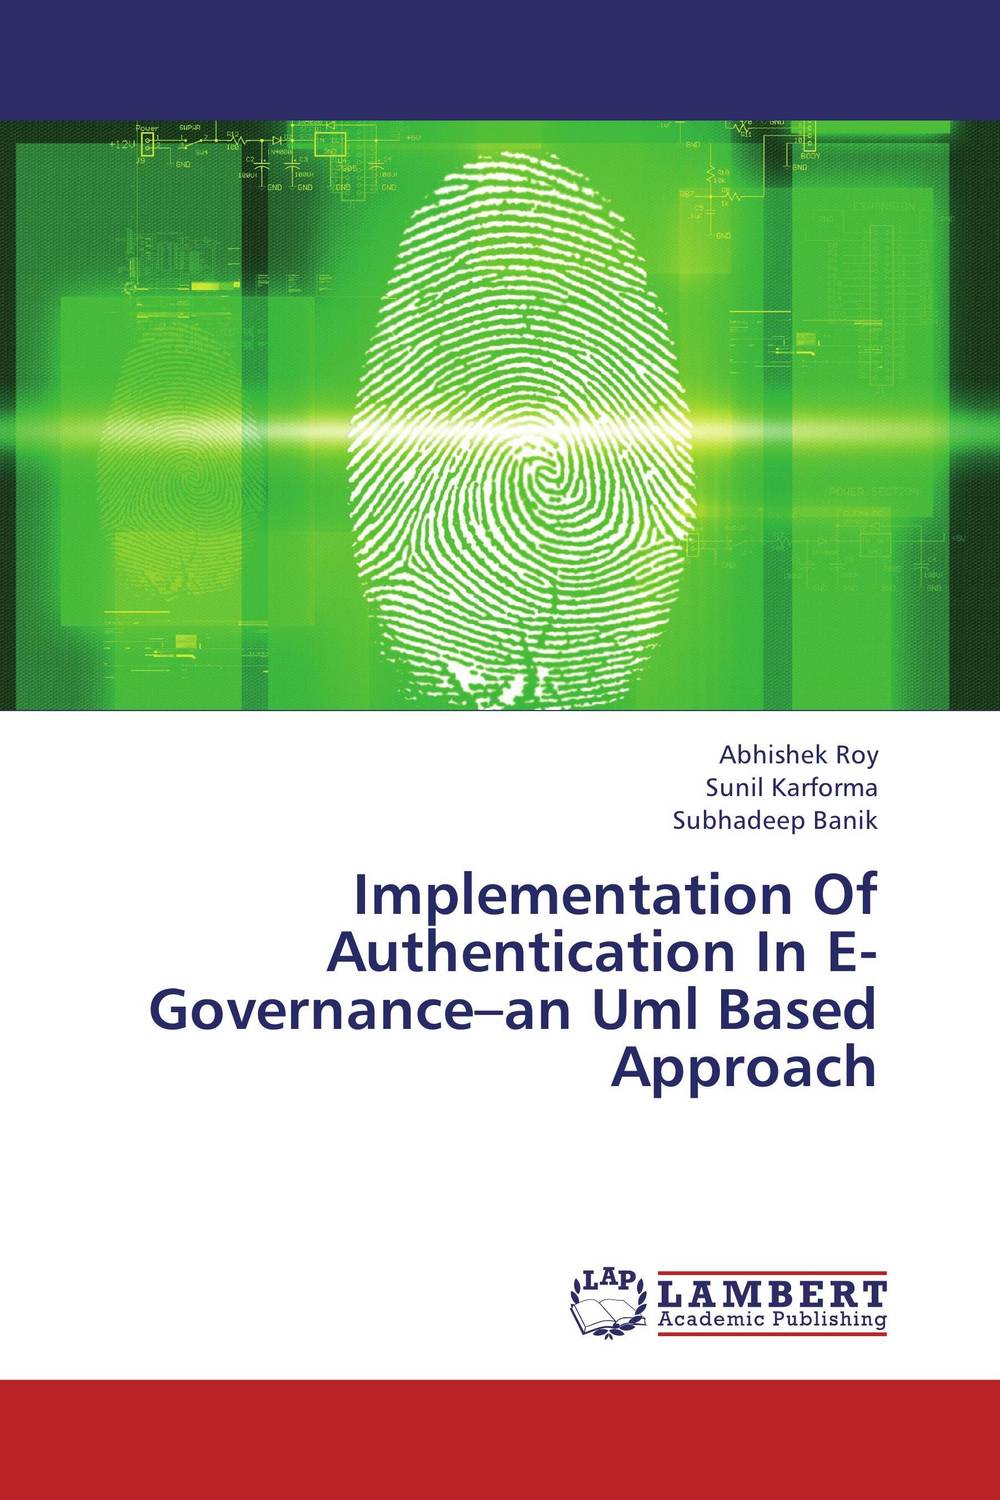 Implementation Of Authentication In E-Governance–an Uml Based Approach